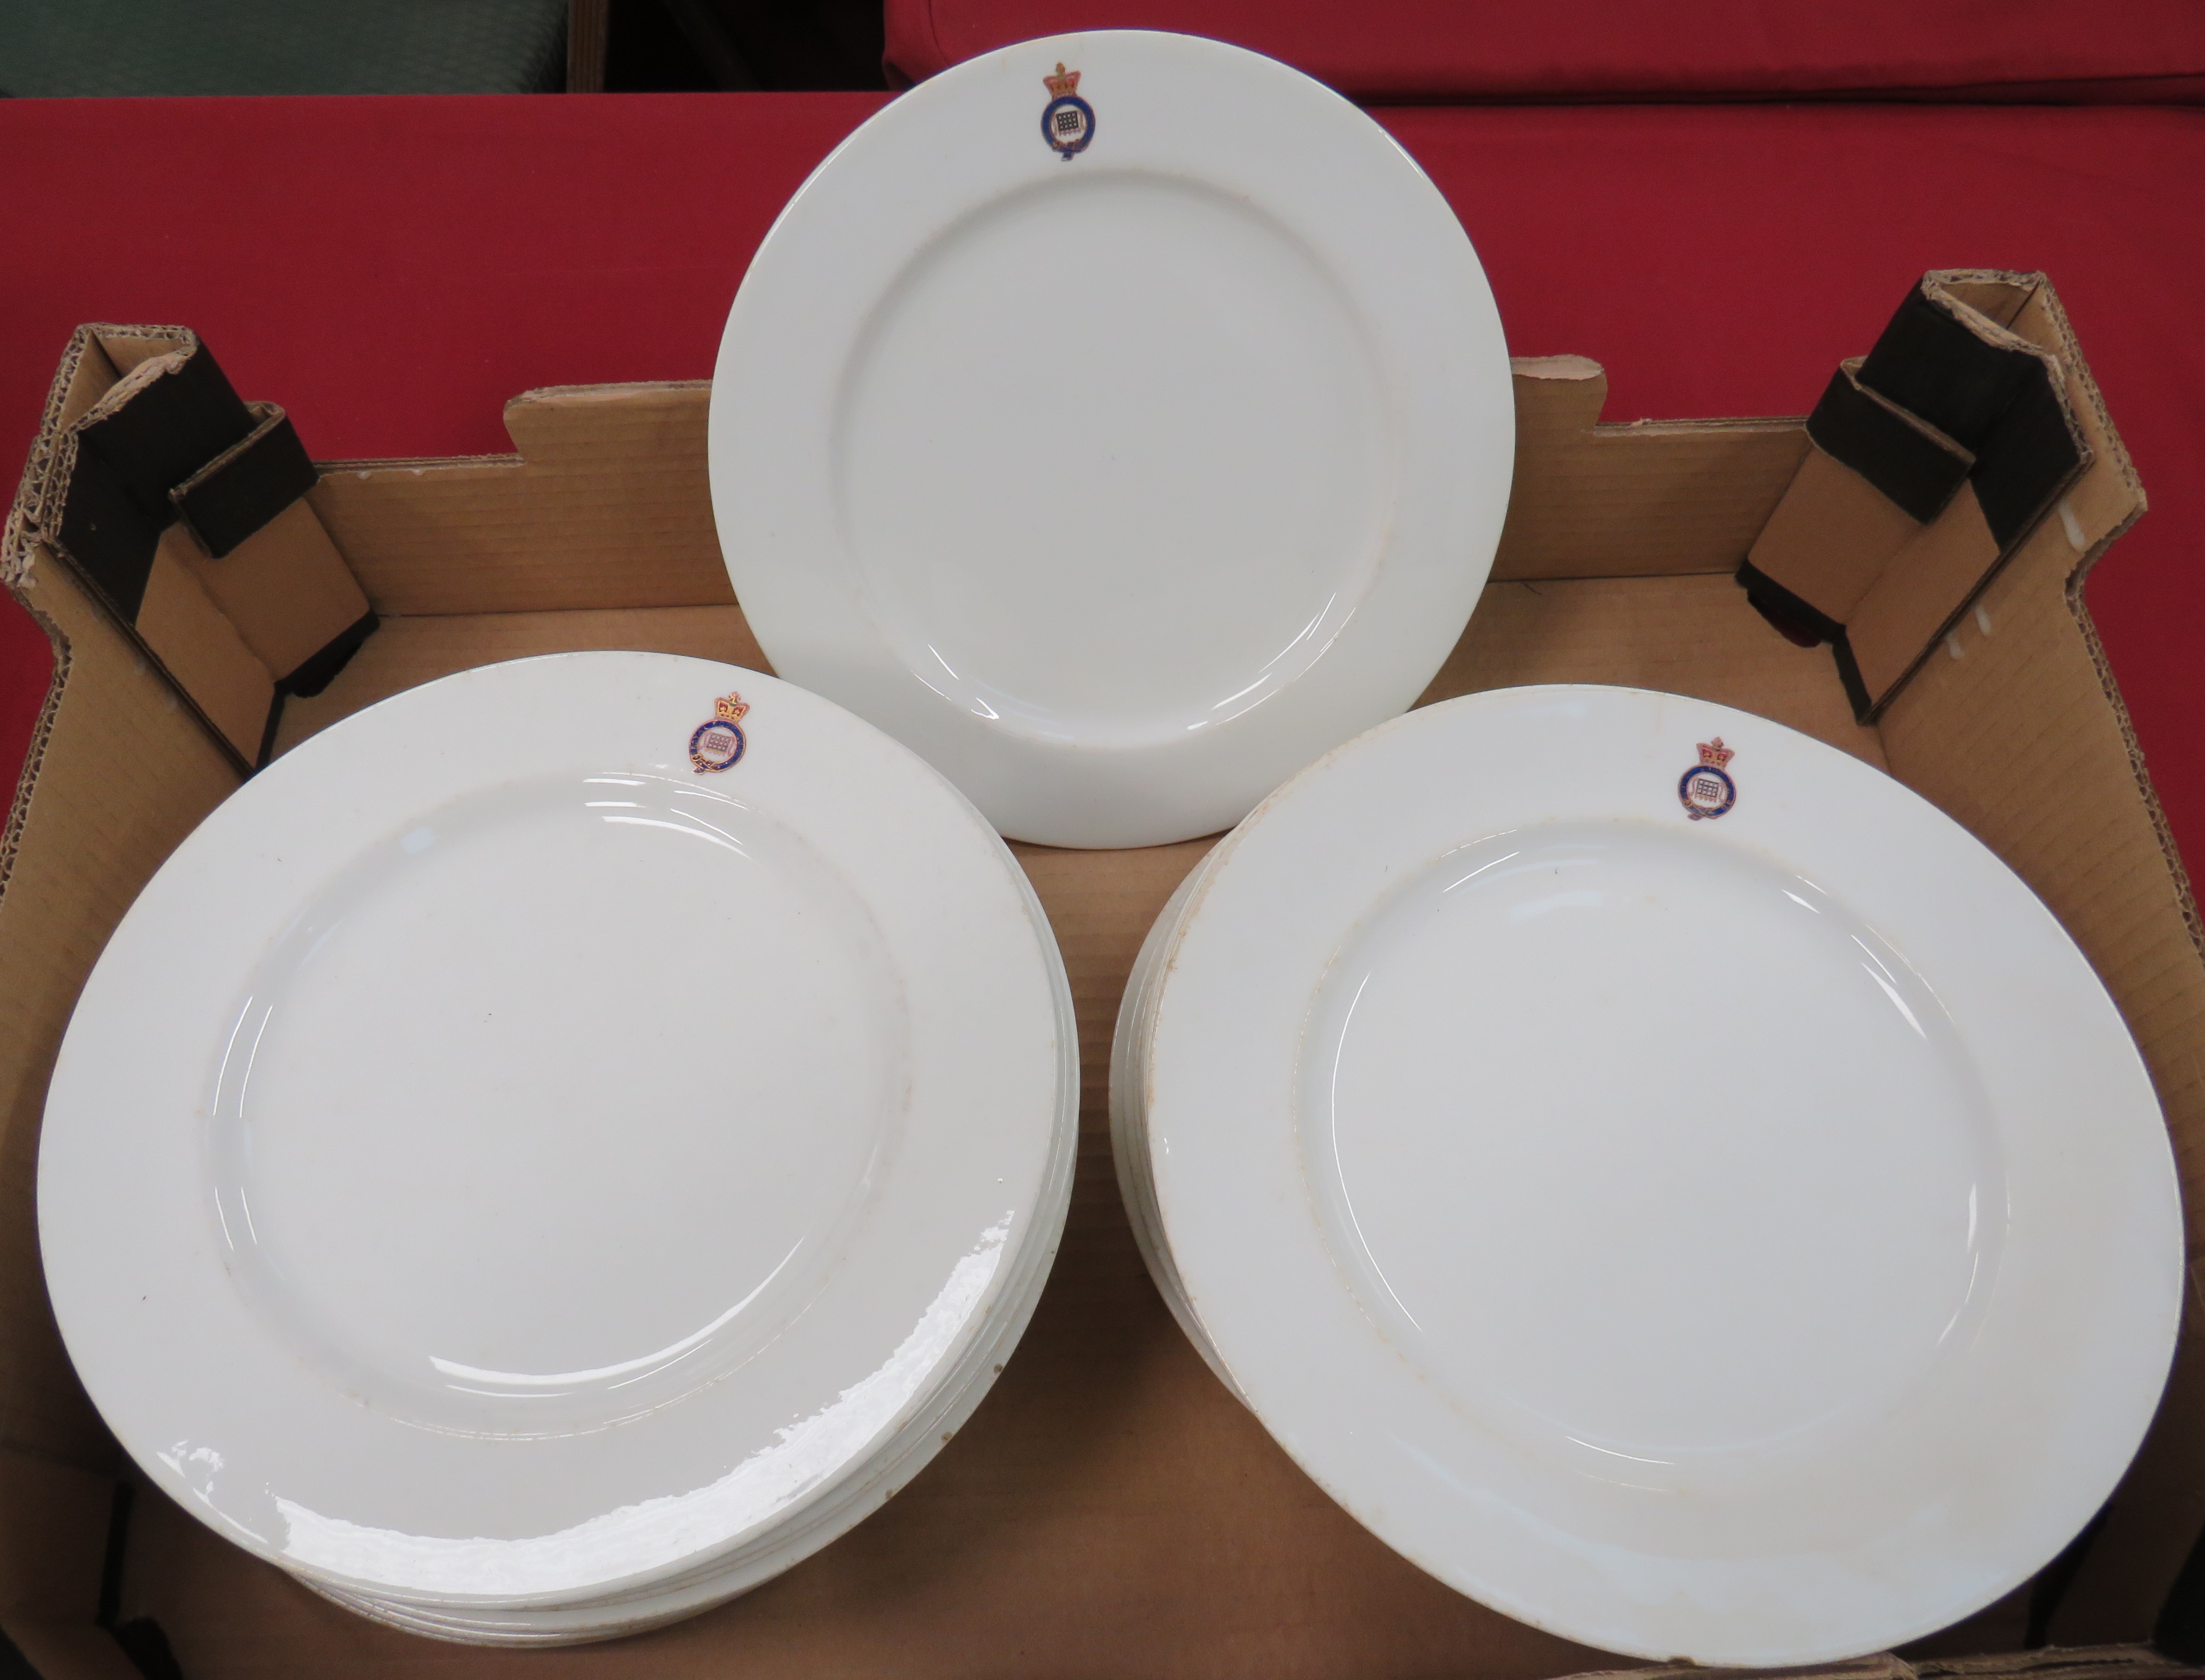 Victorian Royal Bodyguard Dinner Plates 10 inch, white glazed china plates with Victorian crown